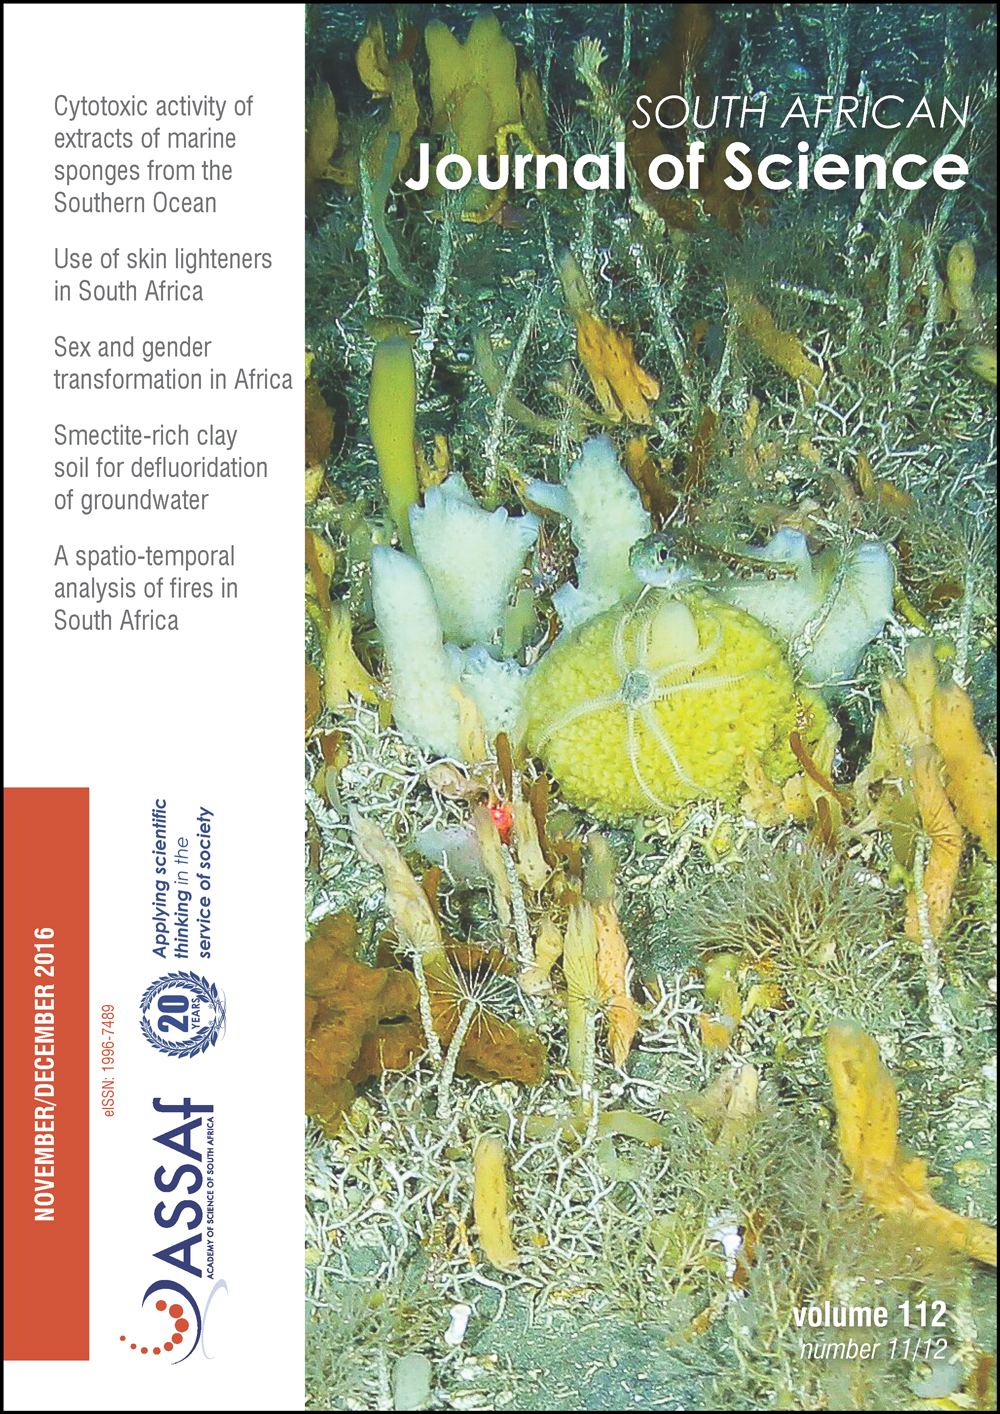 					View Vol. 112 No. 11/12 (2016): South African Journal of Science
				